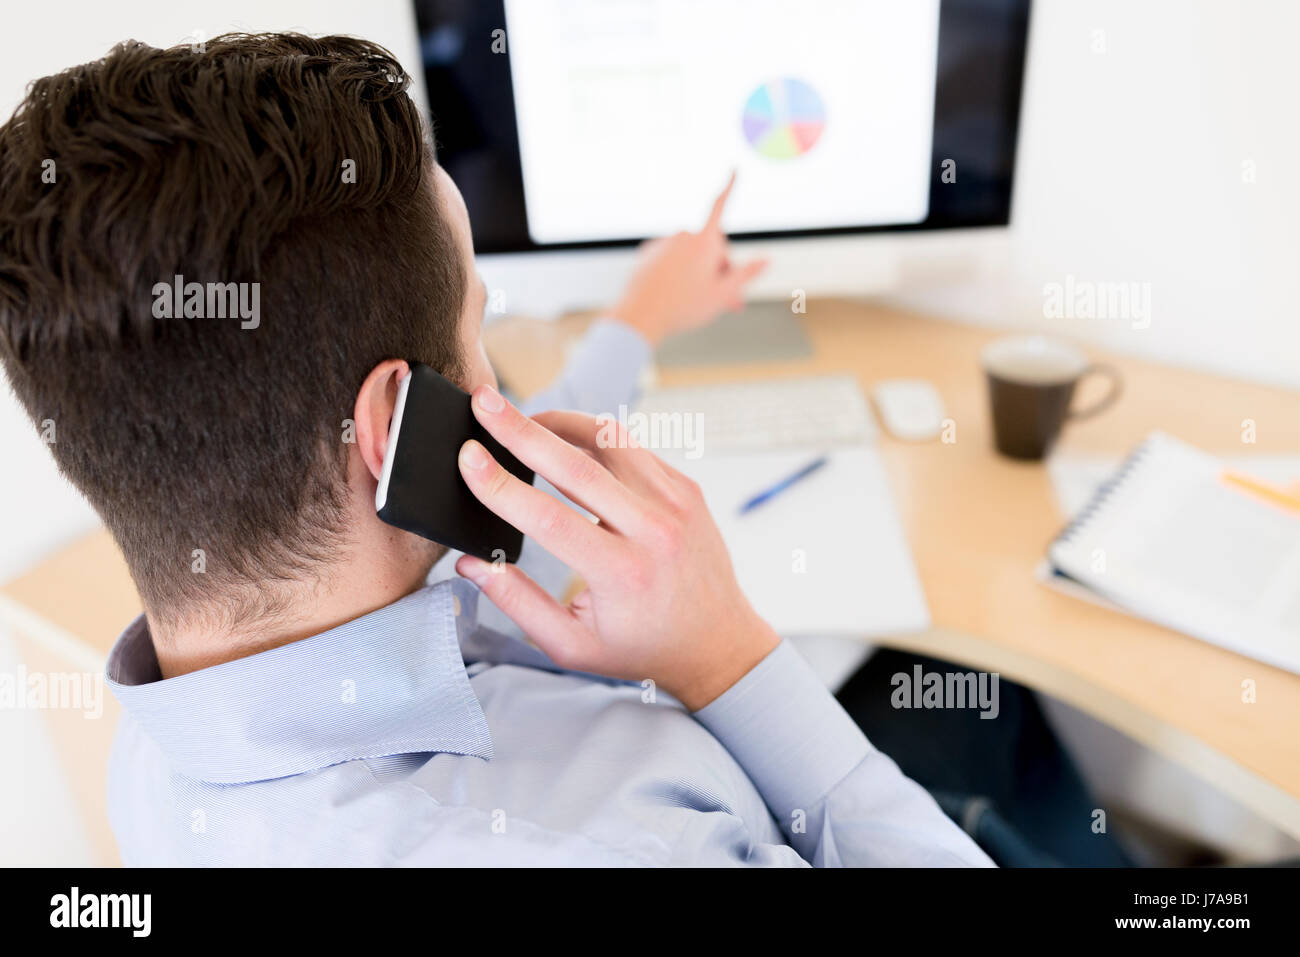 Businessman on the phone analysing pie chart on computer screen Stock Photo